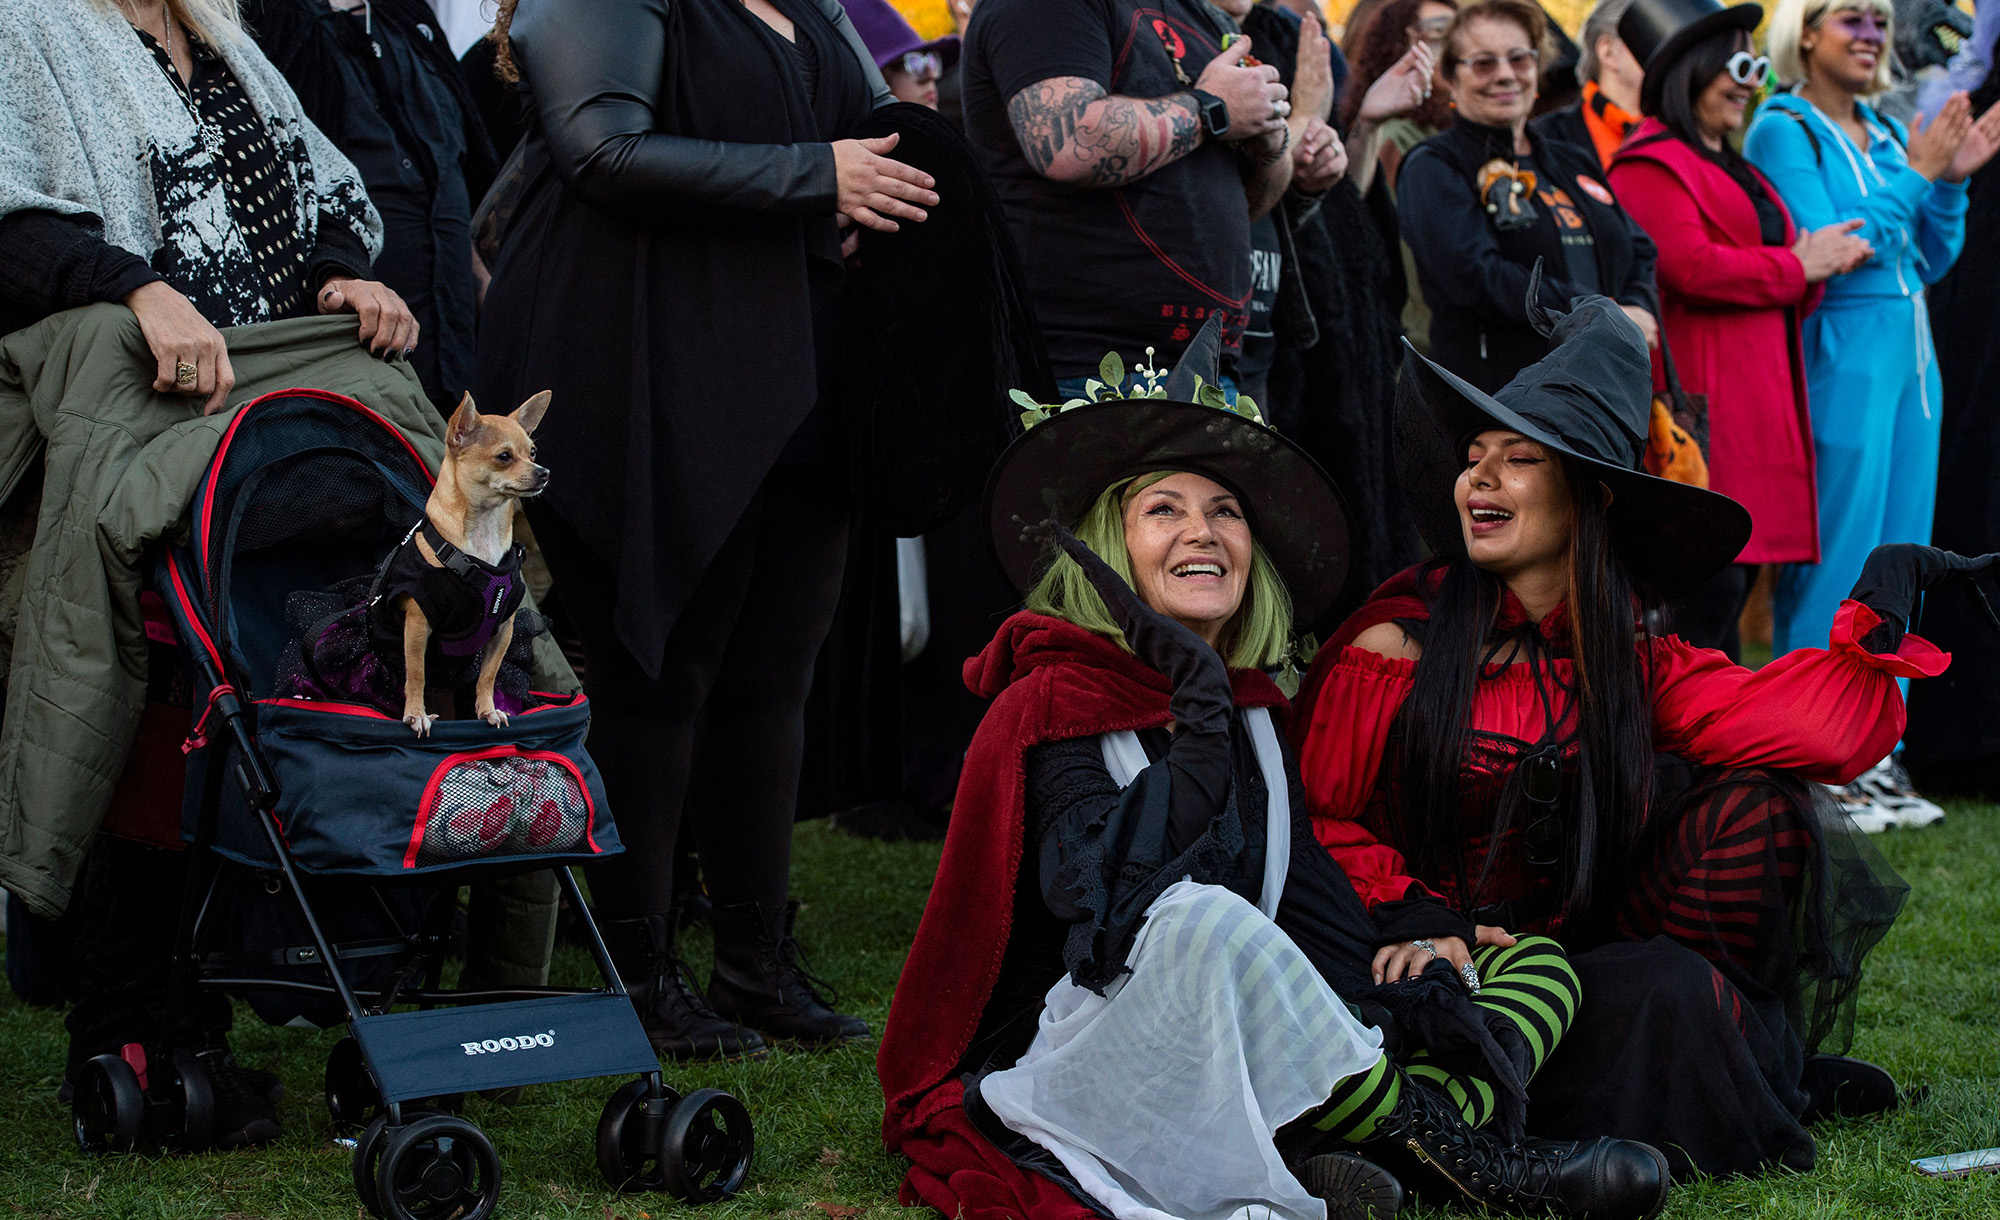 
Halloween revelers at the Salem Witches&#8217; Magic Circle in Salem, Massachusetts on October 31, 2022. JOSEPH PREZIOSO/AFP via Getty Images.






